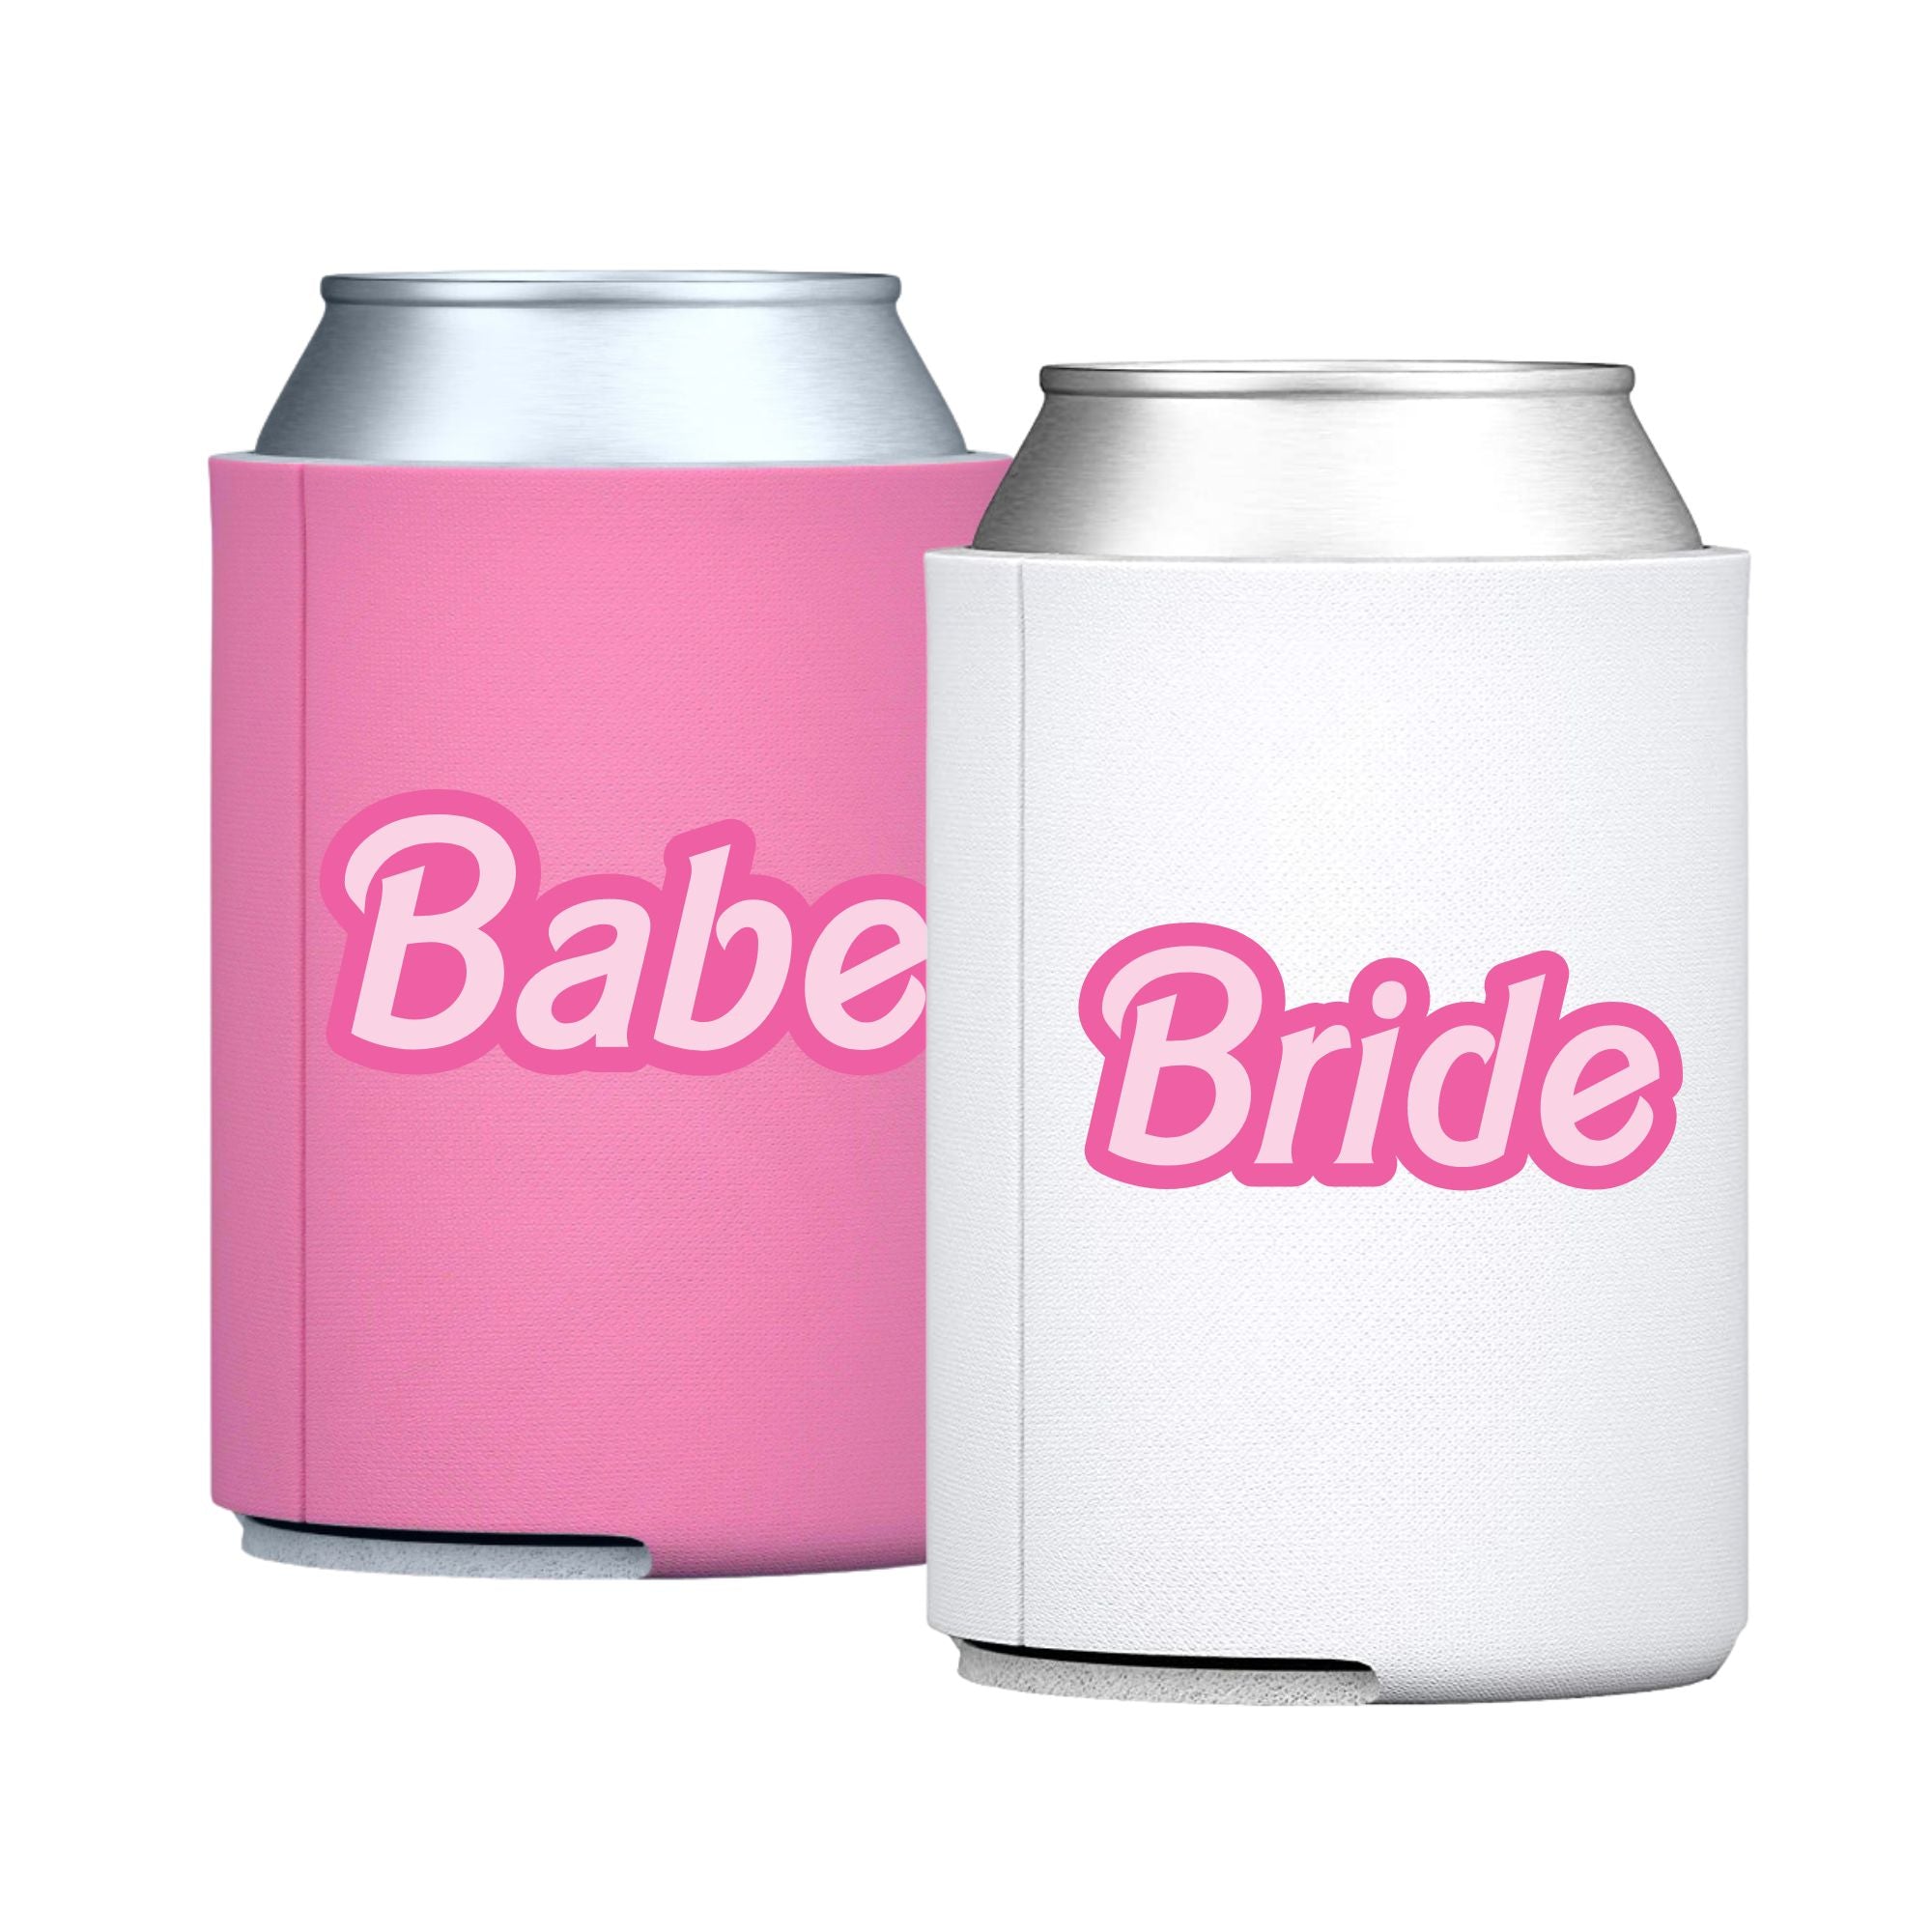 https://www.sprinkledwithpinkshop.com/cdn/shop/products/lets-bach-party-bridebabe-can-coolers-787794_5000x.jpg?v=1692394174